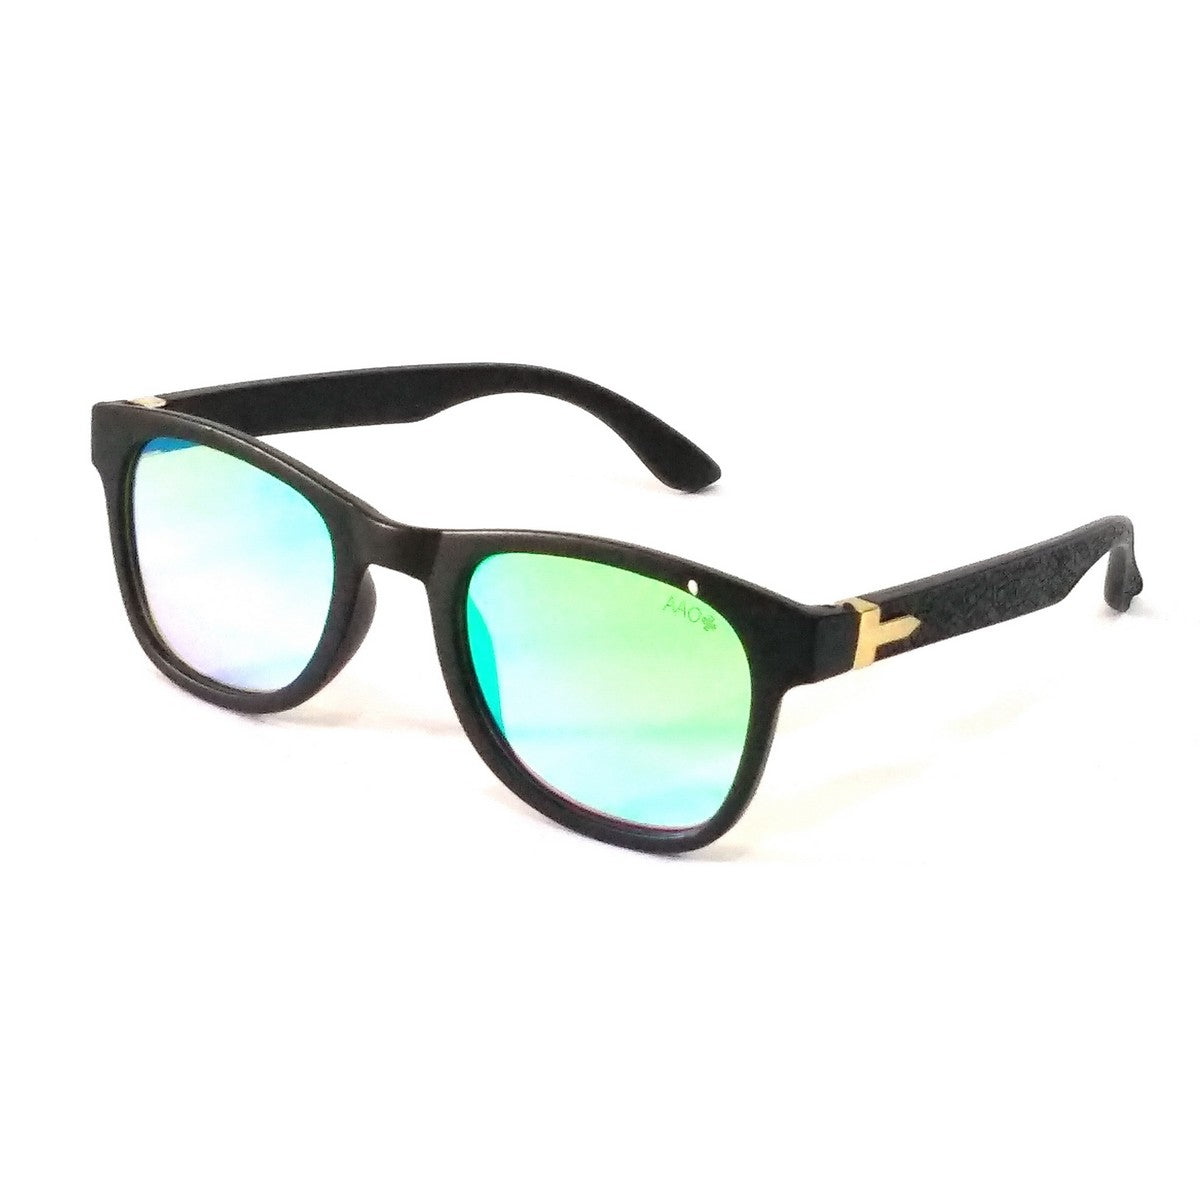 Mirrored Aviator Unisex Sunglasses (0RB3025112/1958|58 millimeters|Cry. Green  Mirror Multi.Green) Price in India, Specs, Reviews, Offers, Coupons |  Topprice.in